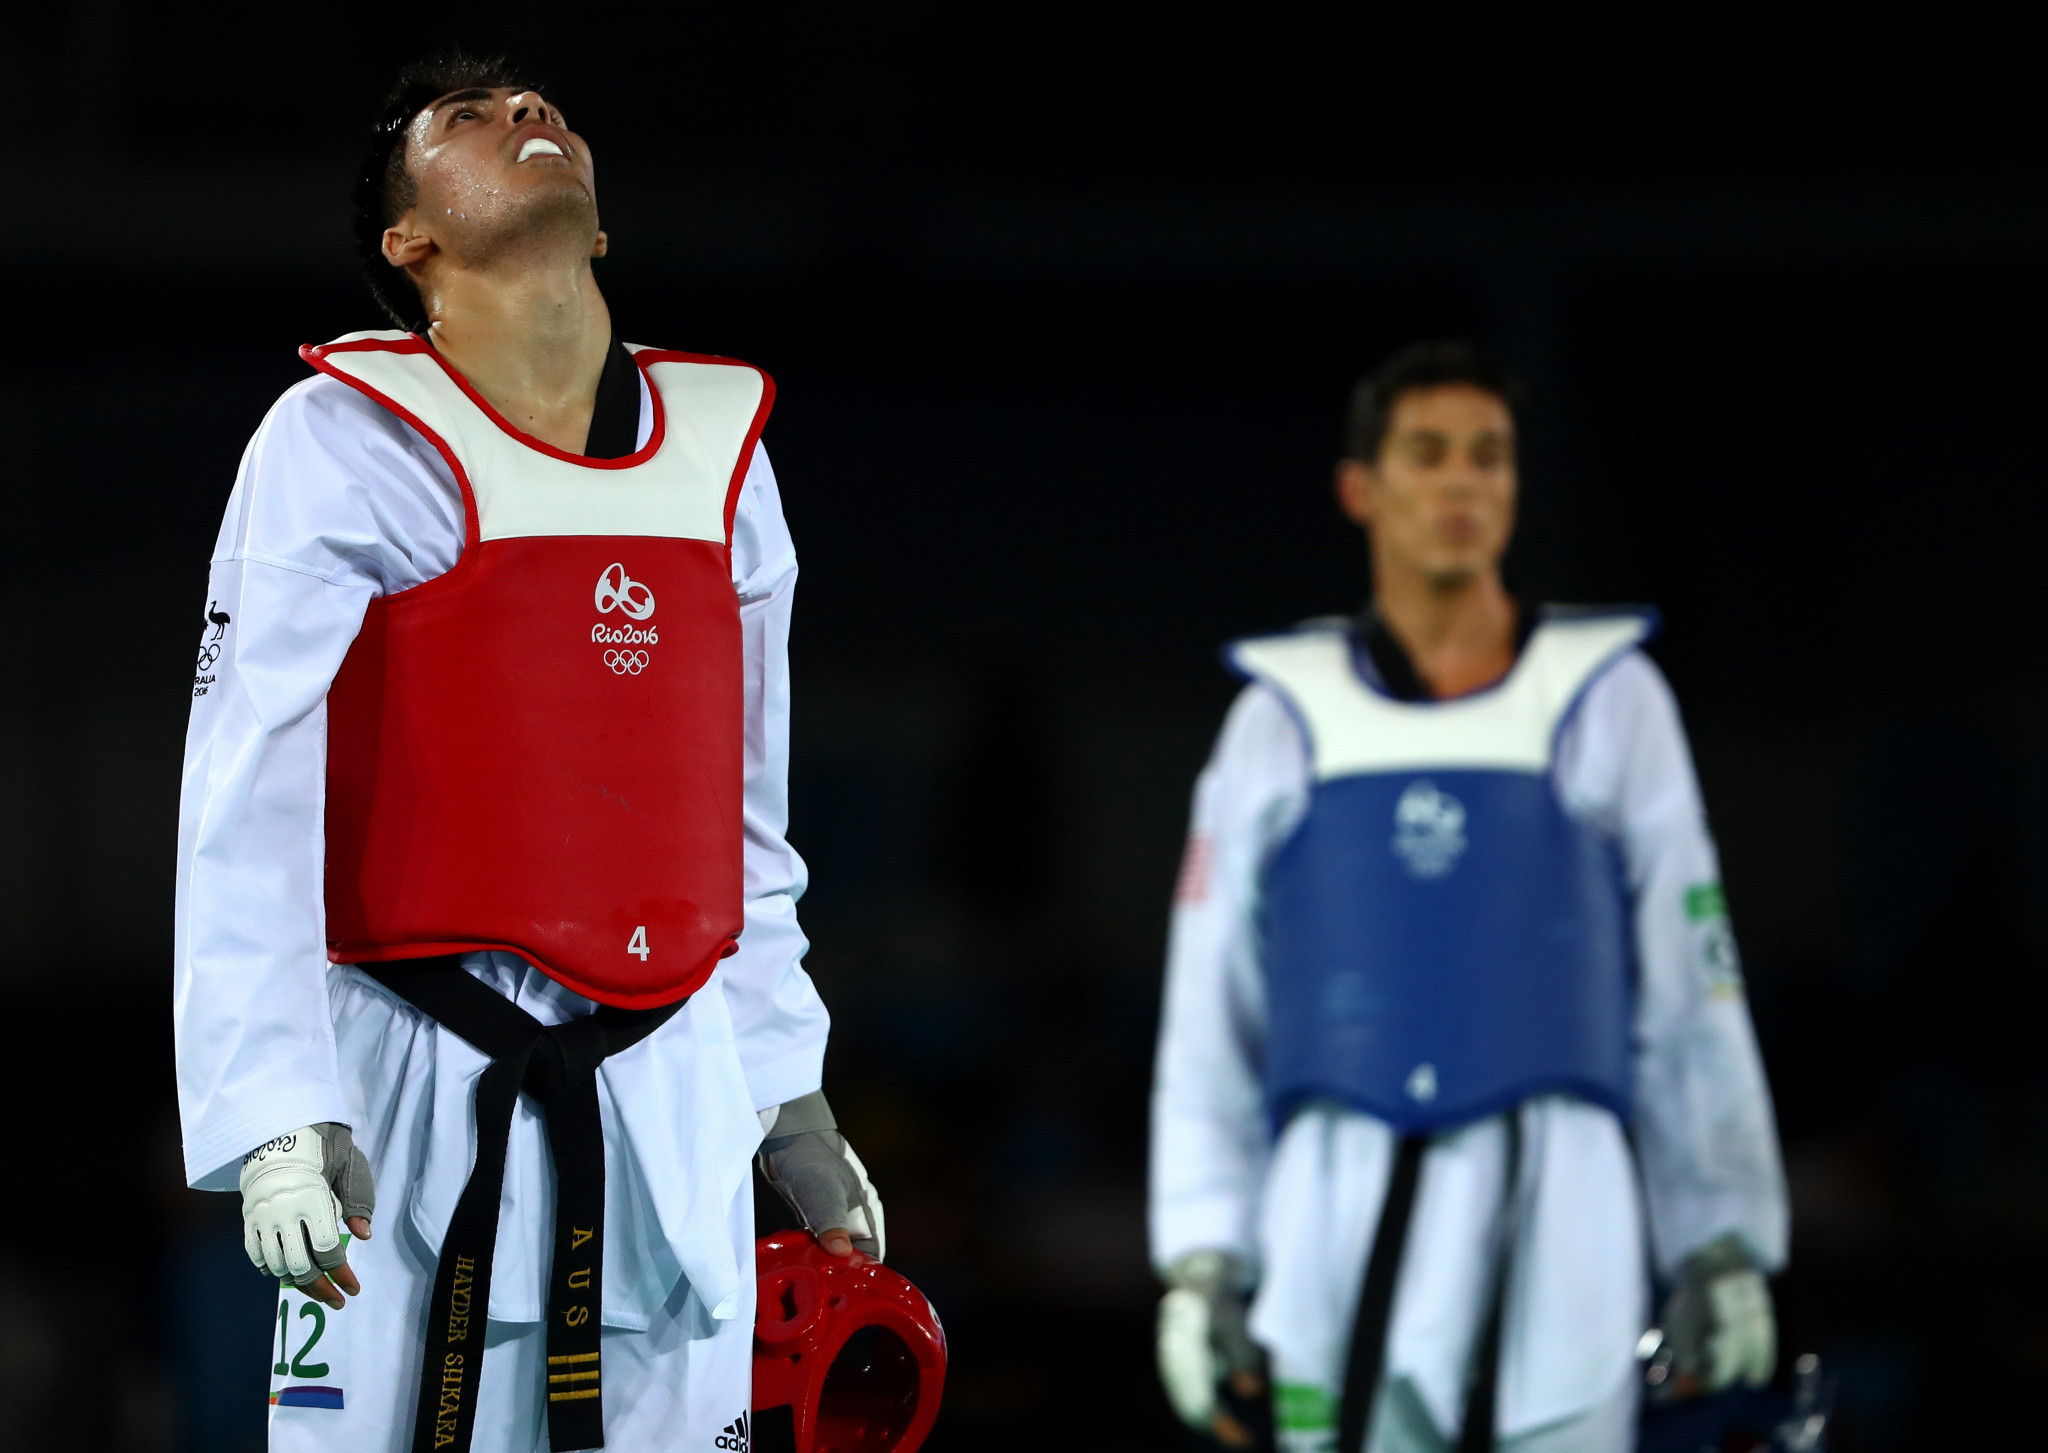 Australia has failed to pick up a taekwondo medal in the past four Olympic Games ©Getty Images